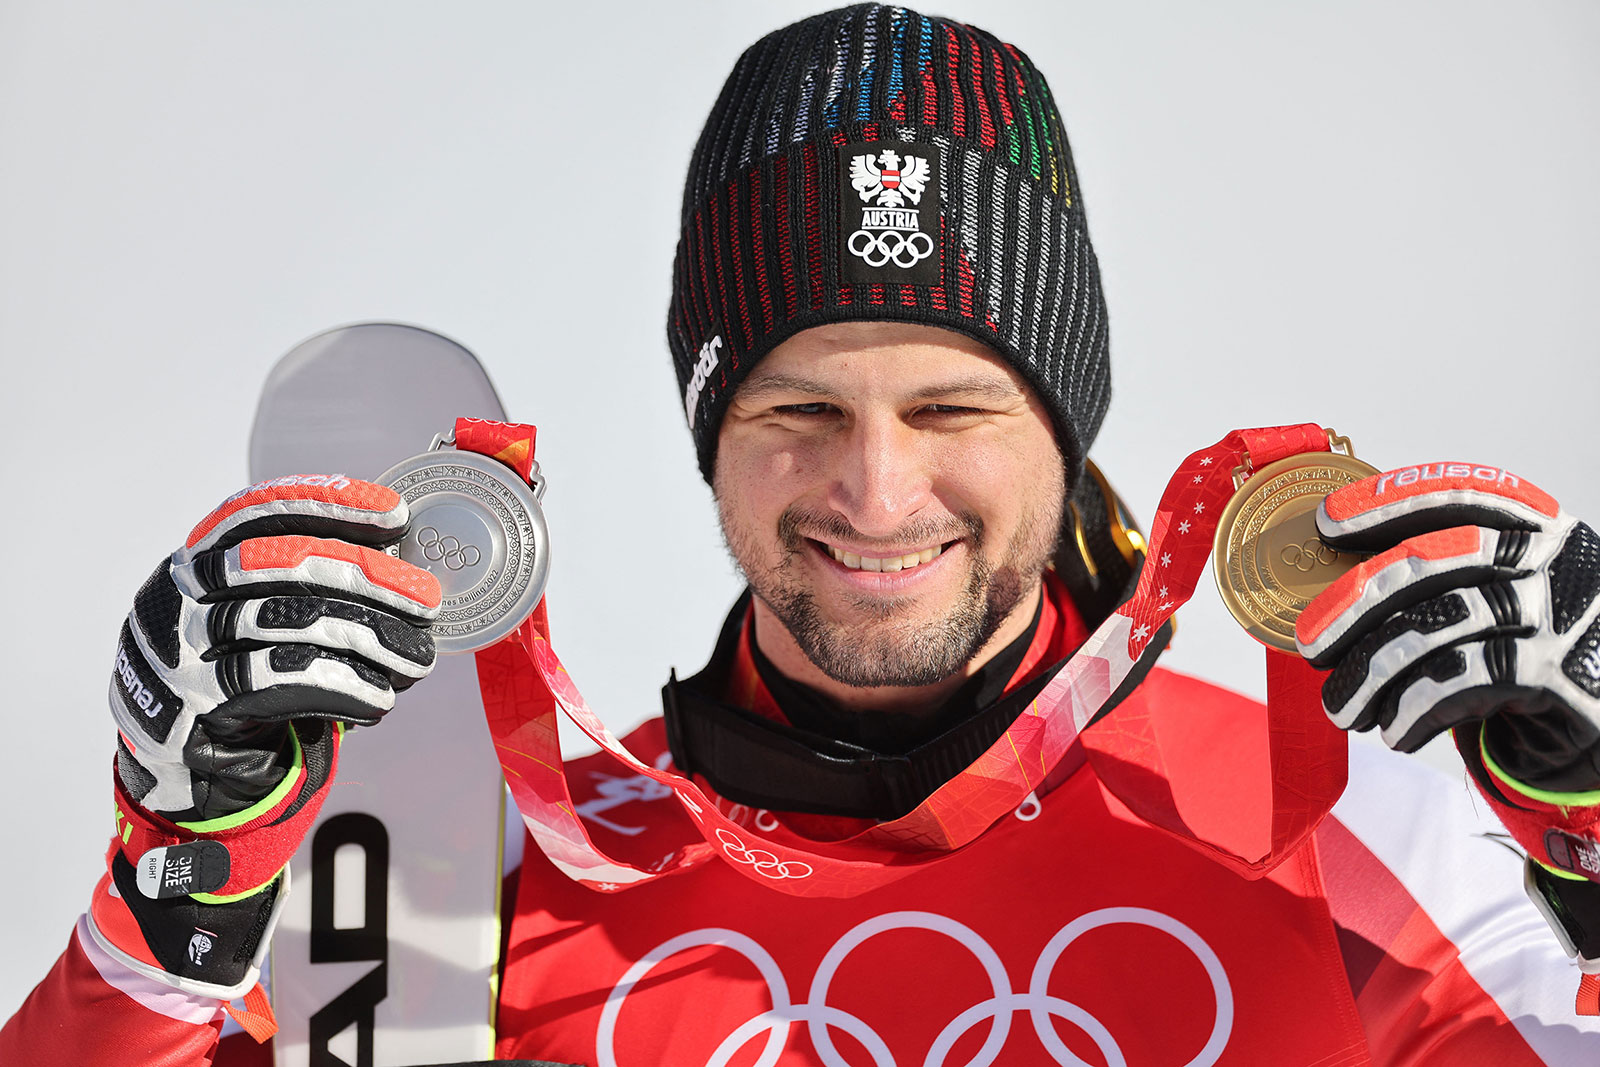 Austria's Johannes Strolz holds up his silver medal for the men's slalom and gold medal for the Alpine combined on February 16.